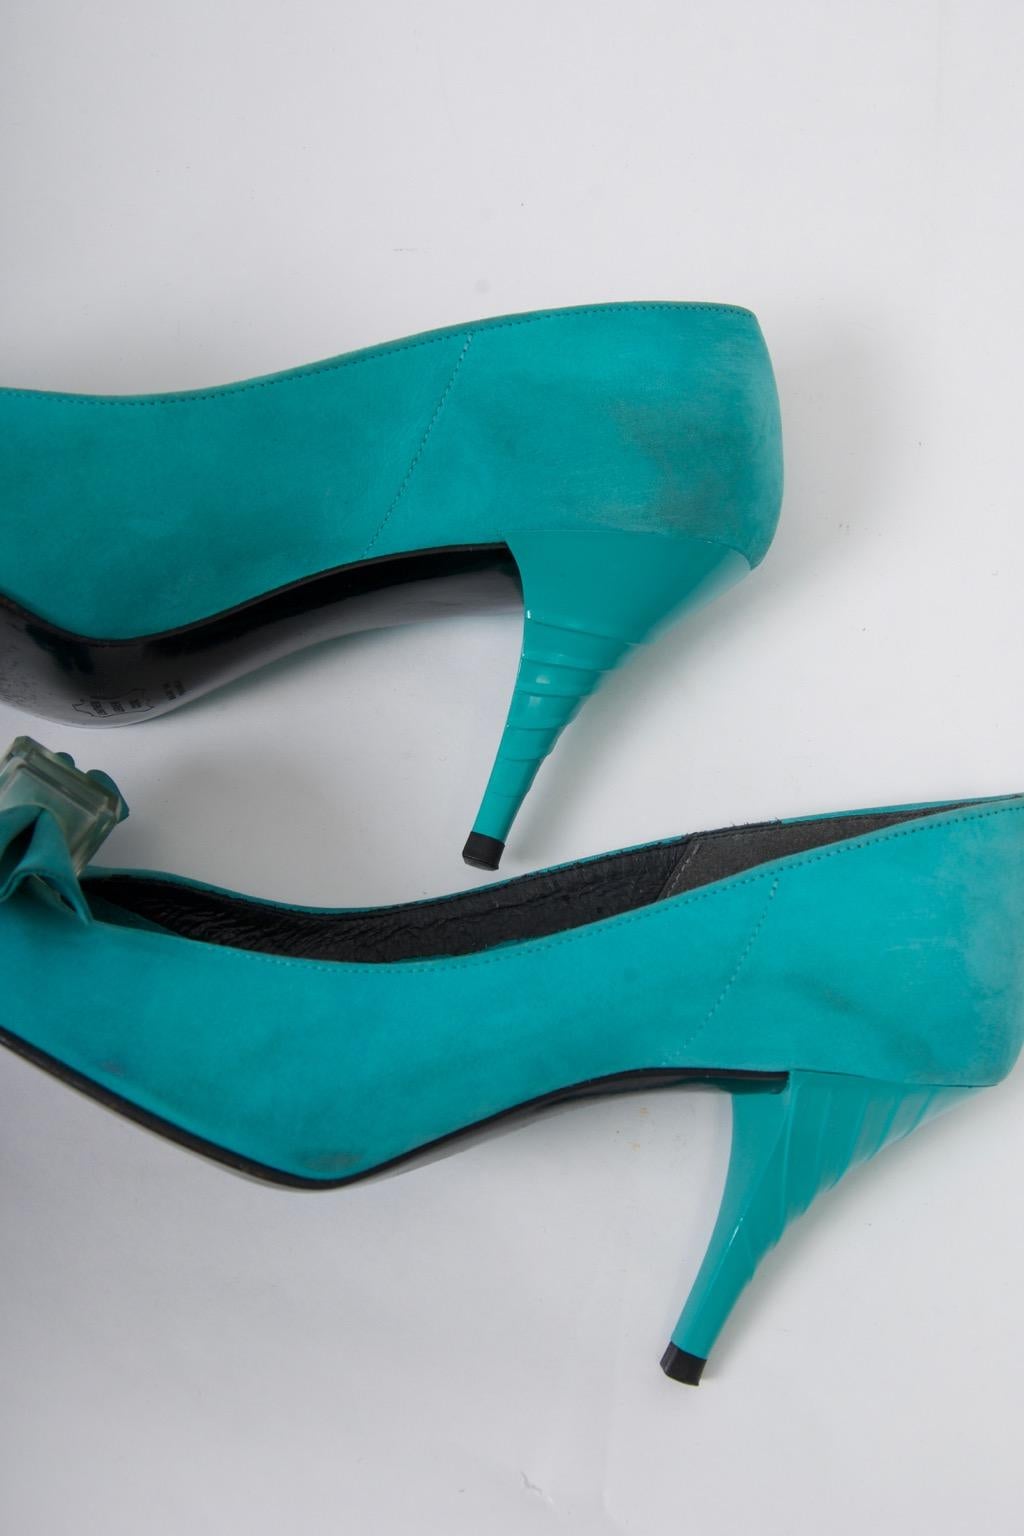 Turquoise Suede 1980s Pumps by Seducta For Sale 2